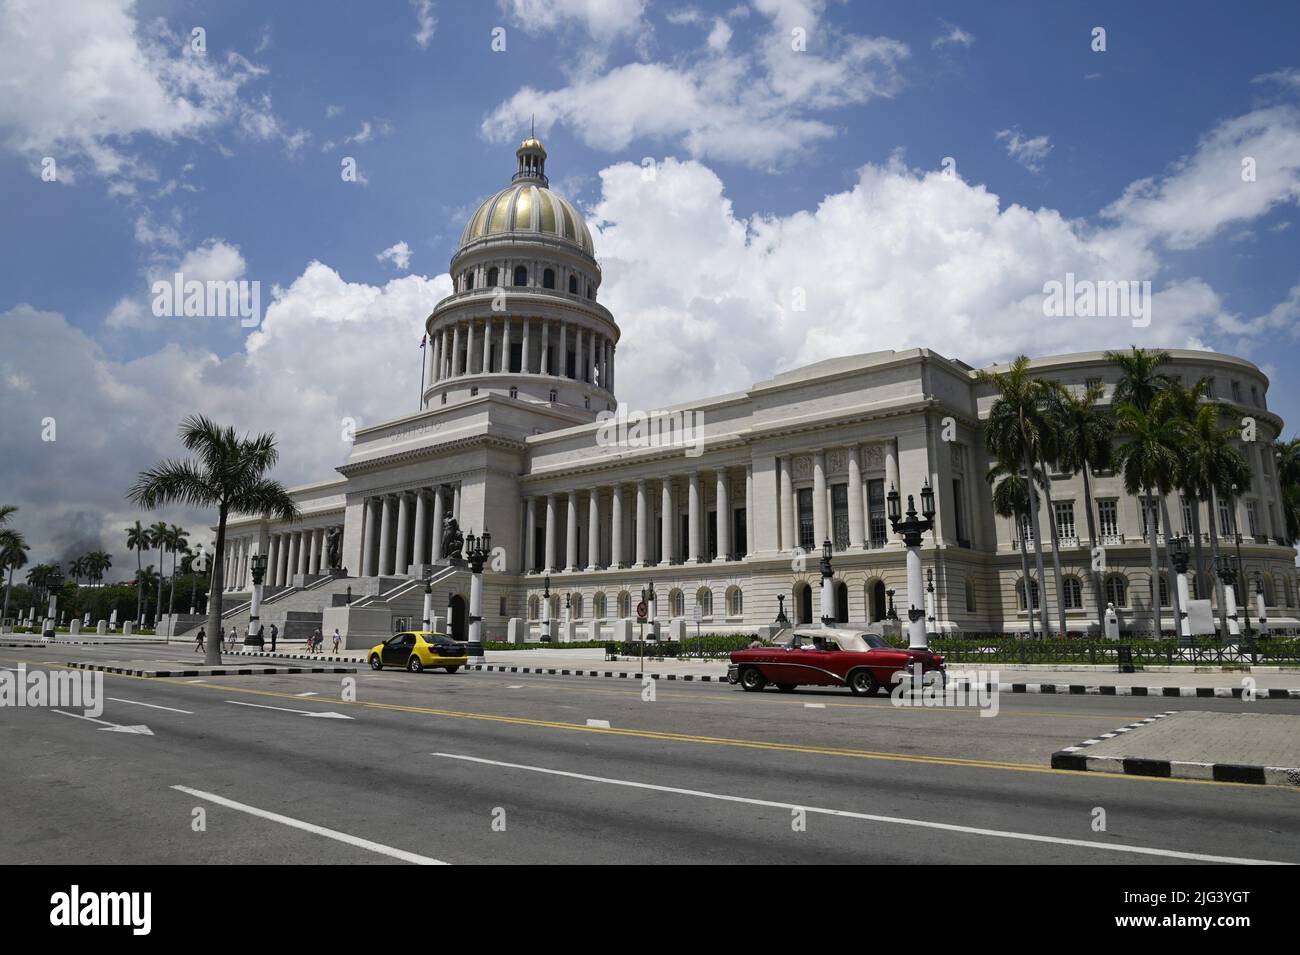 Vintage car front of El Capitolio, the emblematic National Capitol building in the historic center of Havana, Cuba. Stock Photo